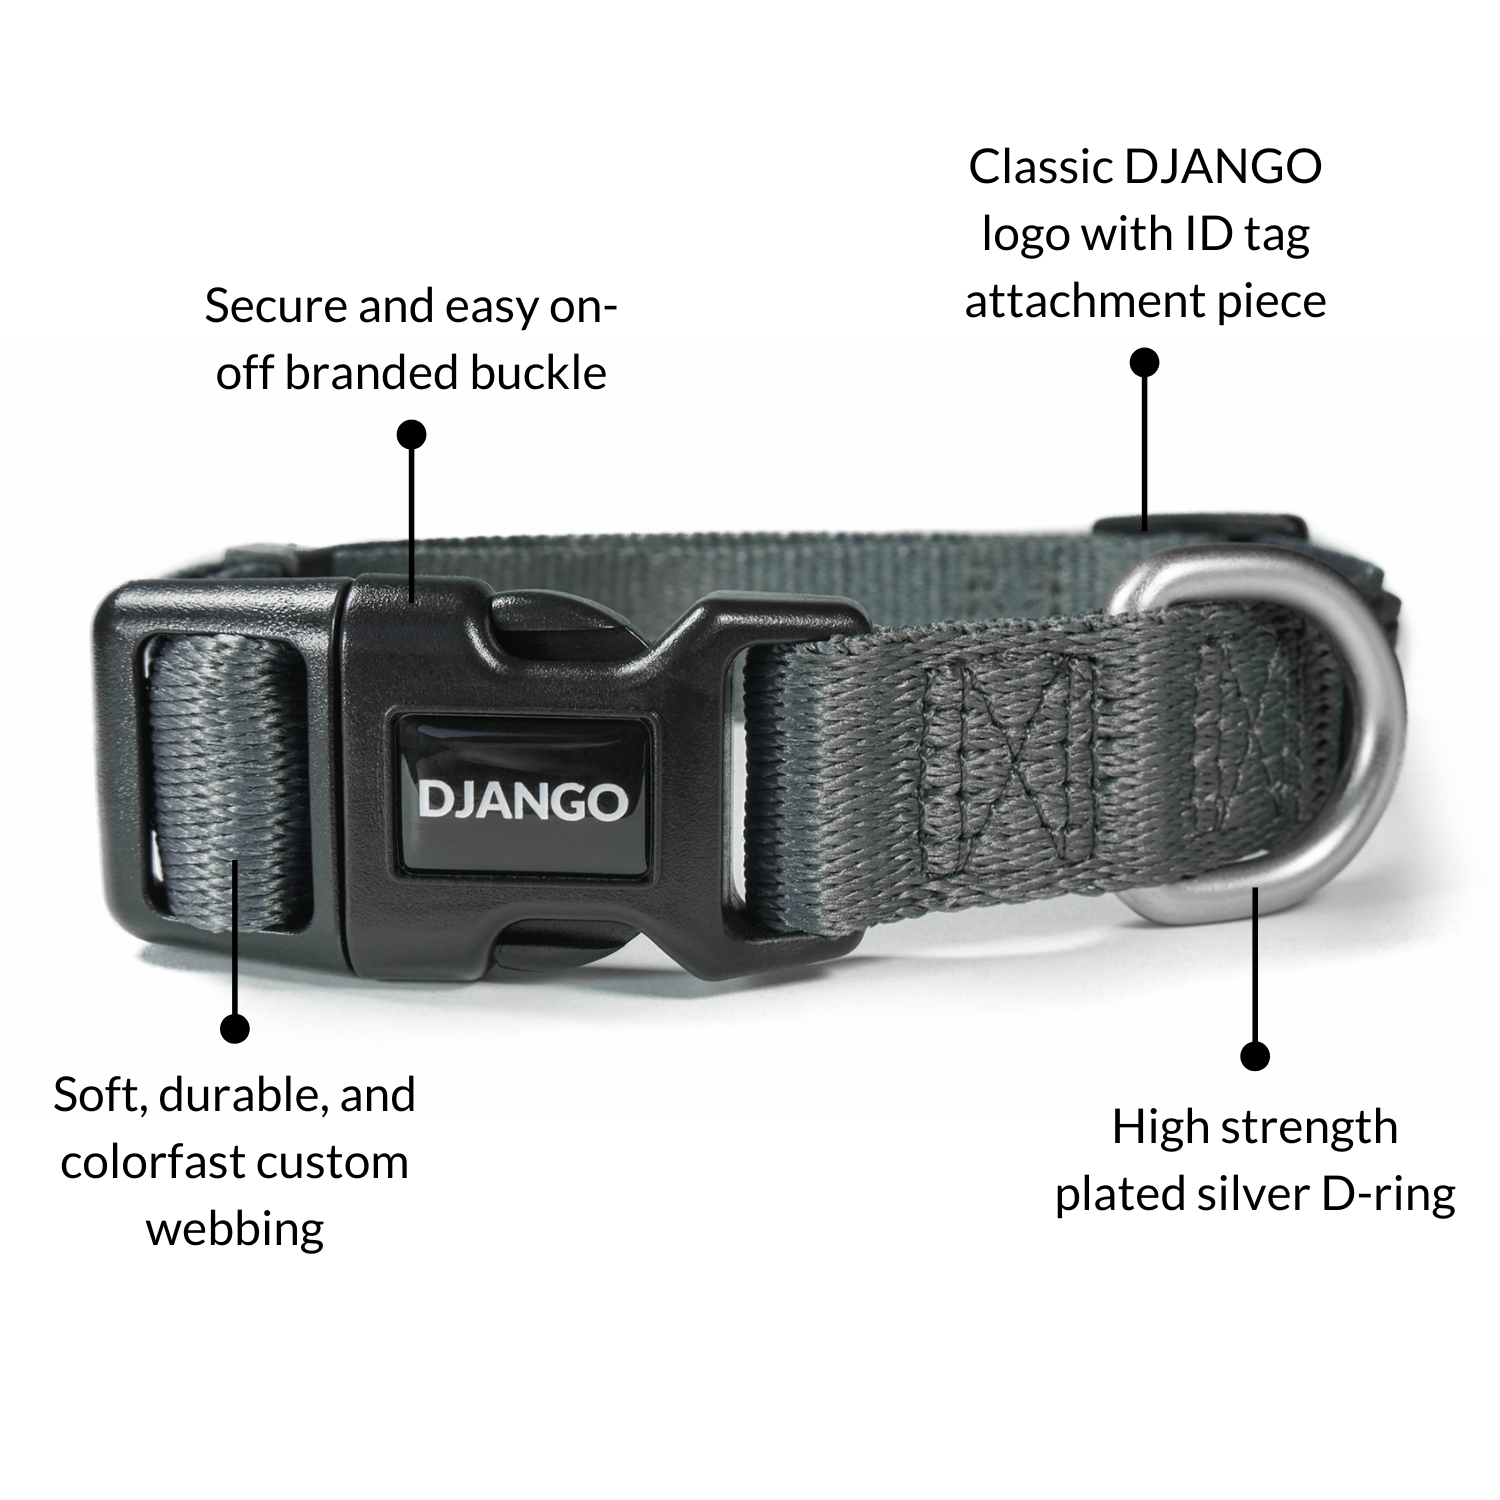 DJANGO Tahoe Dog Collar in Poppy Seed Gray - Key features include soft and durable custom webbing, a heavy duty plated silver D-ring, a secure and easy on-off side release buckle, and DJANGO's classic logo. - djangobrand.com